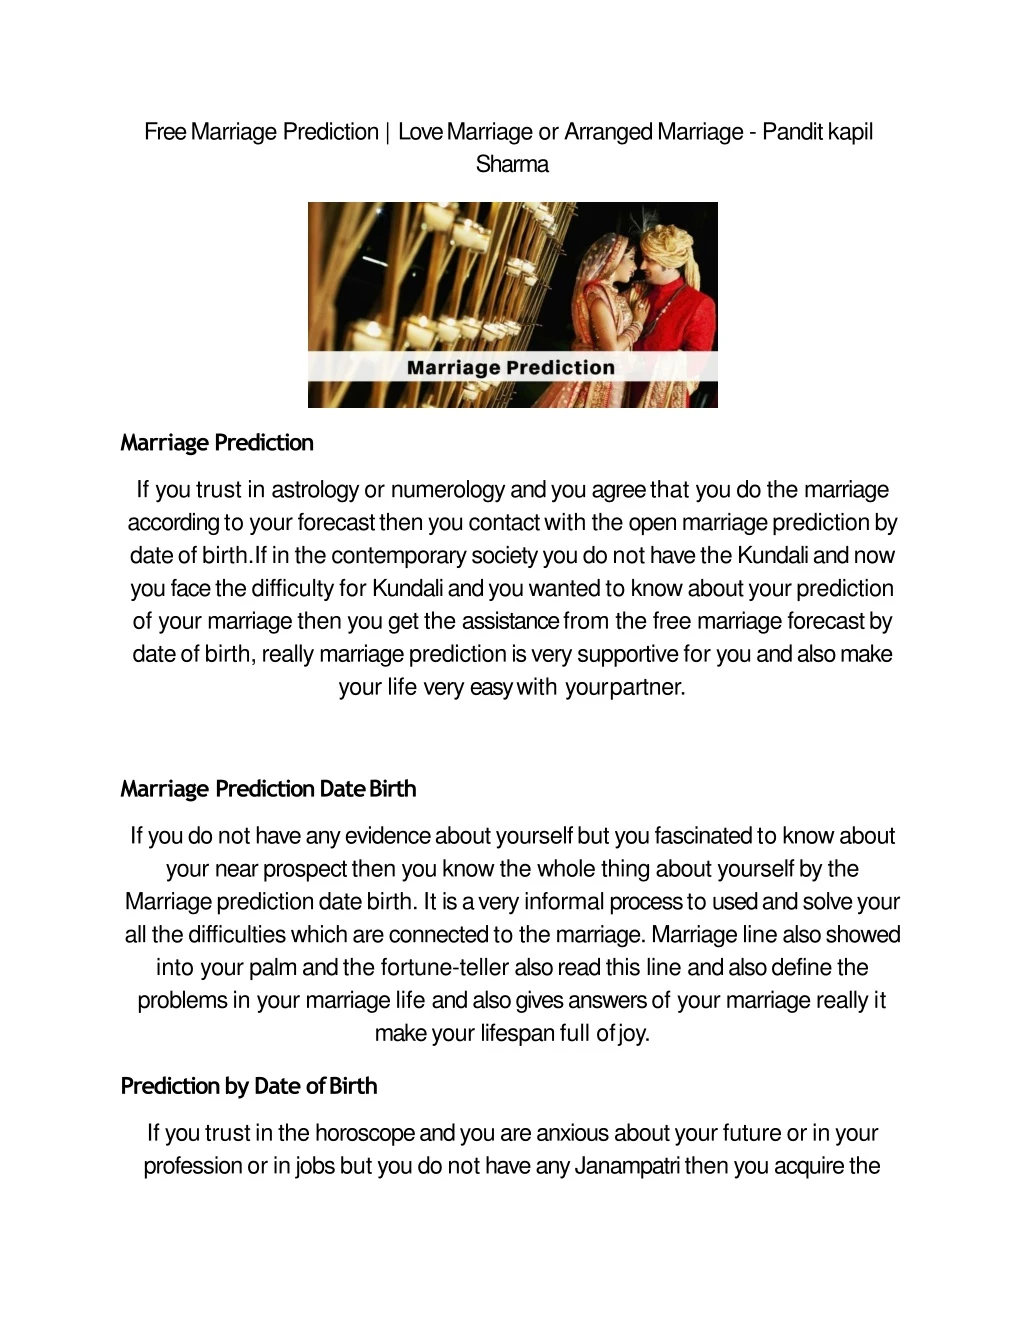 free marriage prediction love marriage